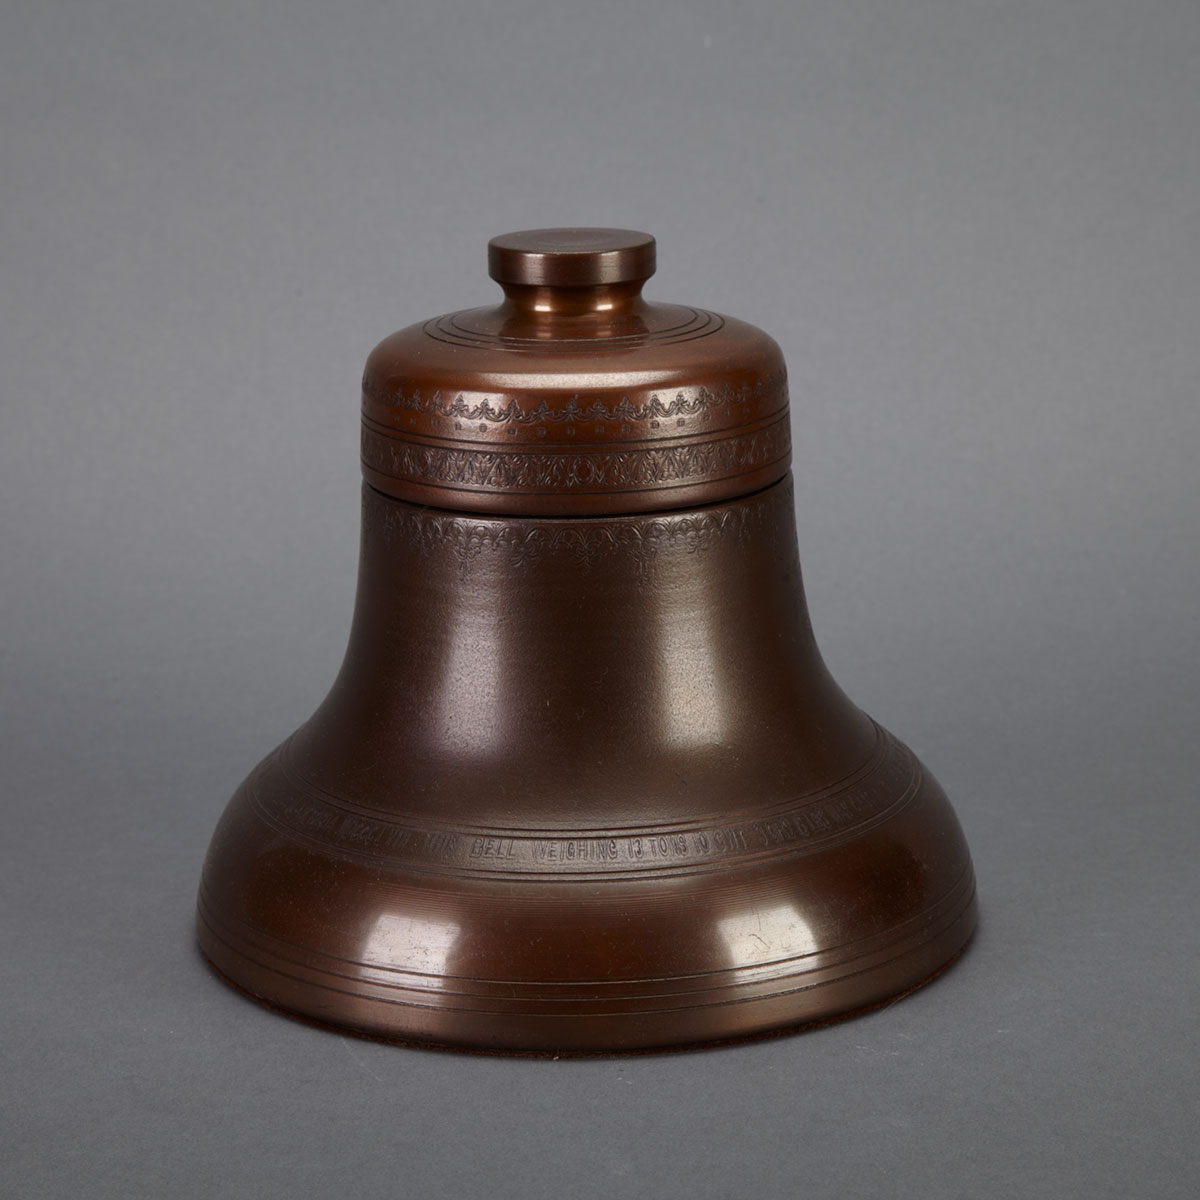 Big Ben Bell Form Tobacco Canister 17823b